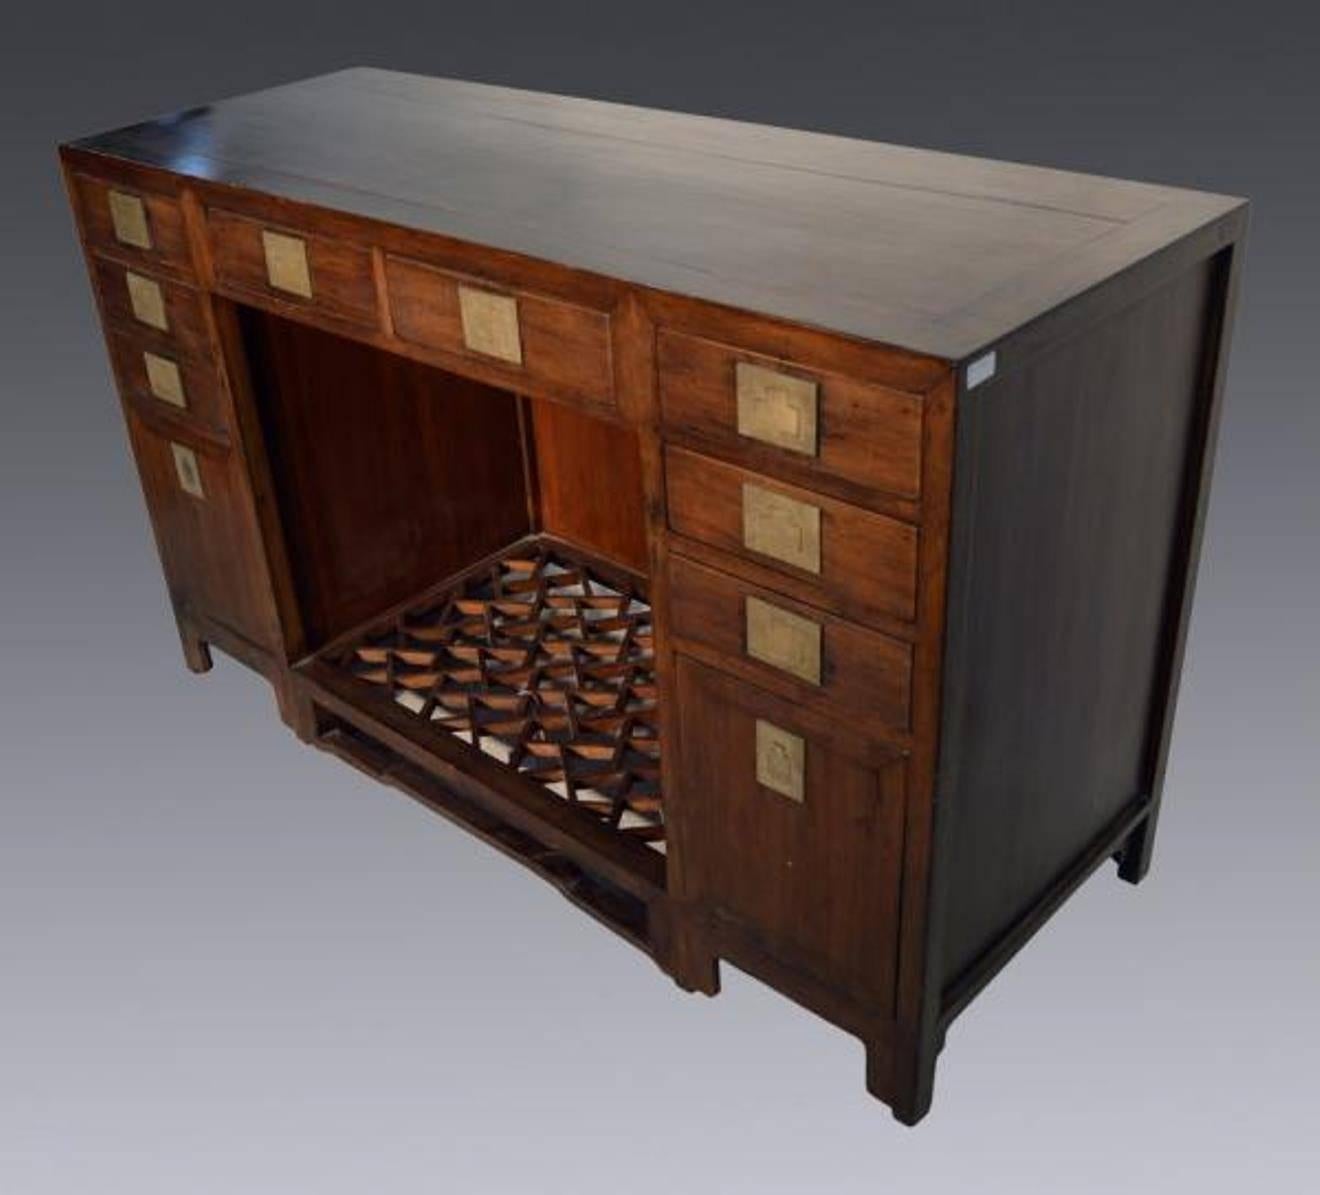 Chinese Antique Fretwork Desk with Bronze Hardware and Drawers from China, 19th Century